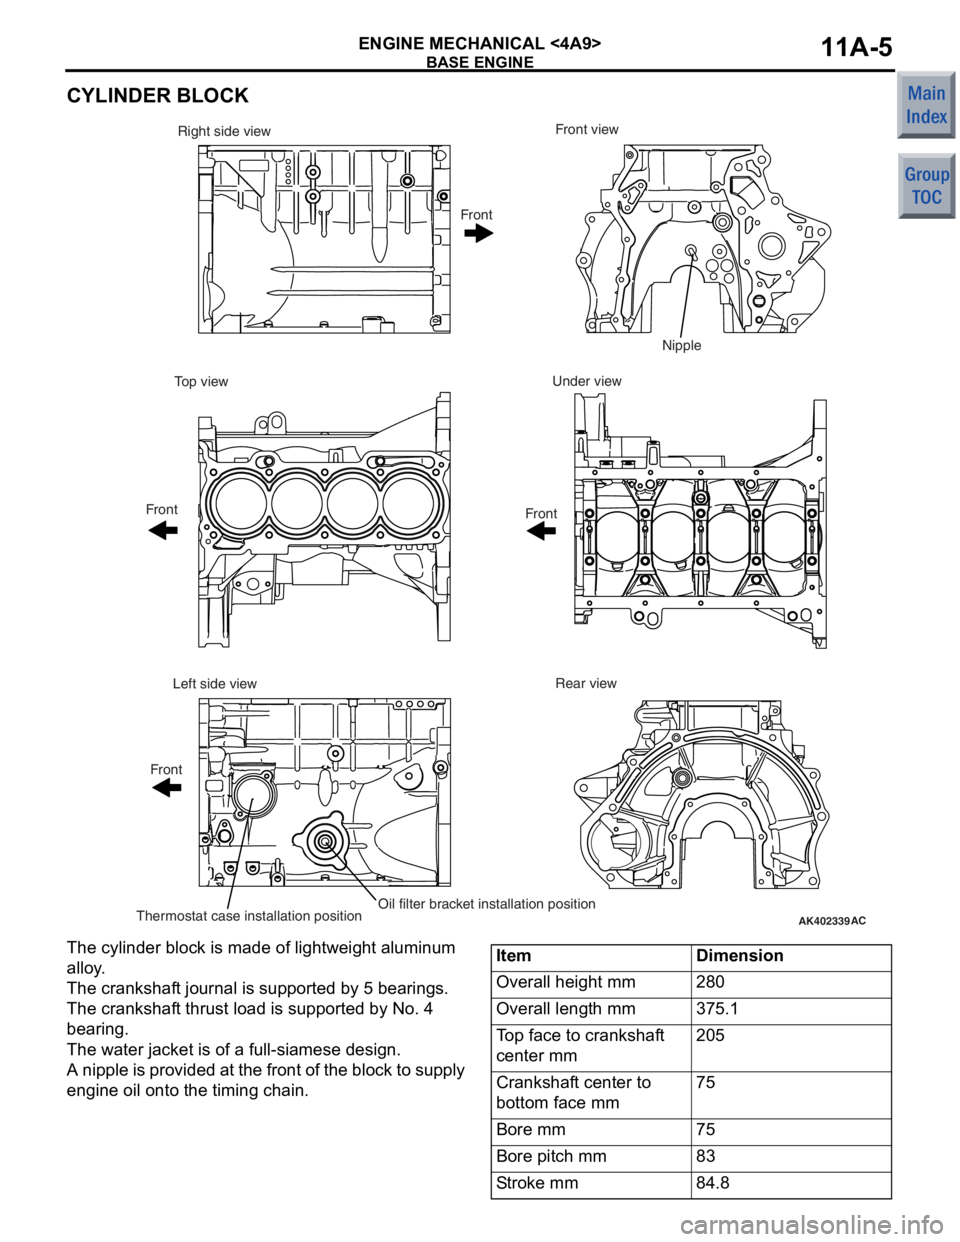 MITSUBISHI COLT 2006  Service Repair Manual 
BASE ENGINE
ENGINE MECHANICAL <4A9>11A-5
CYLINDER BLOCK
AK402339AC
Front view
Right side view
Under view
Top view
Rear view
Left side view
Thermostat case installation positionOil filter bracket inst